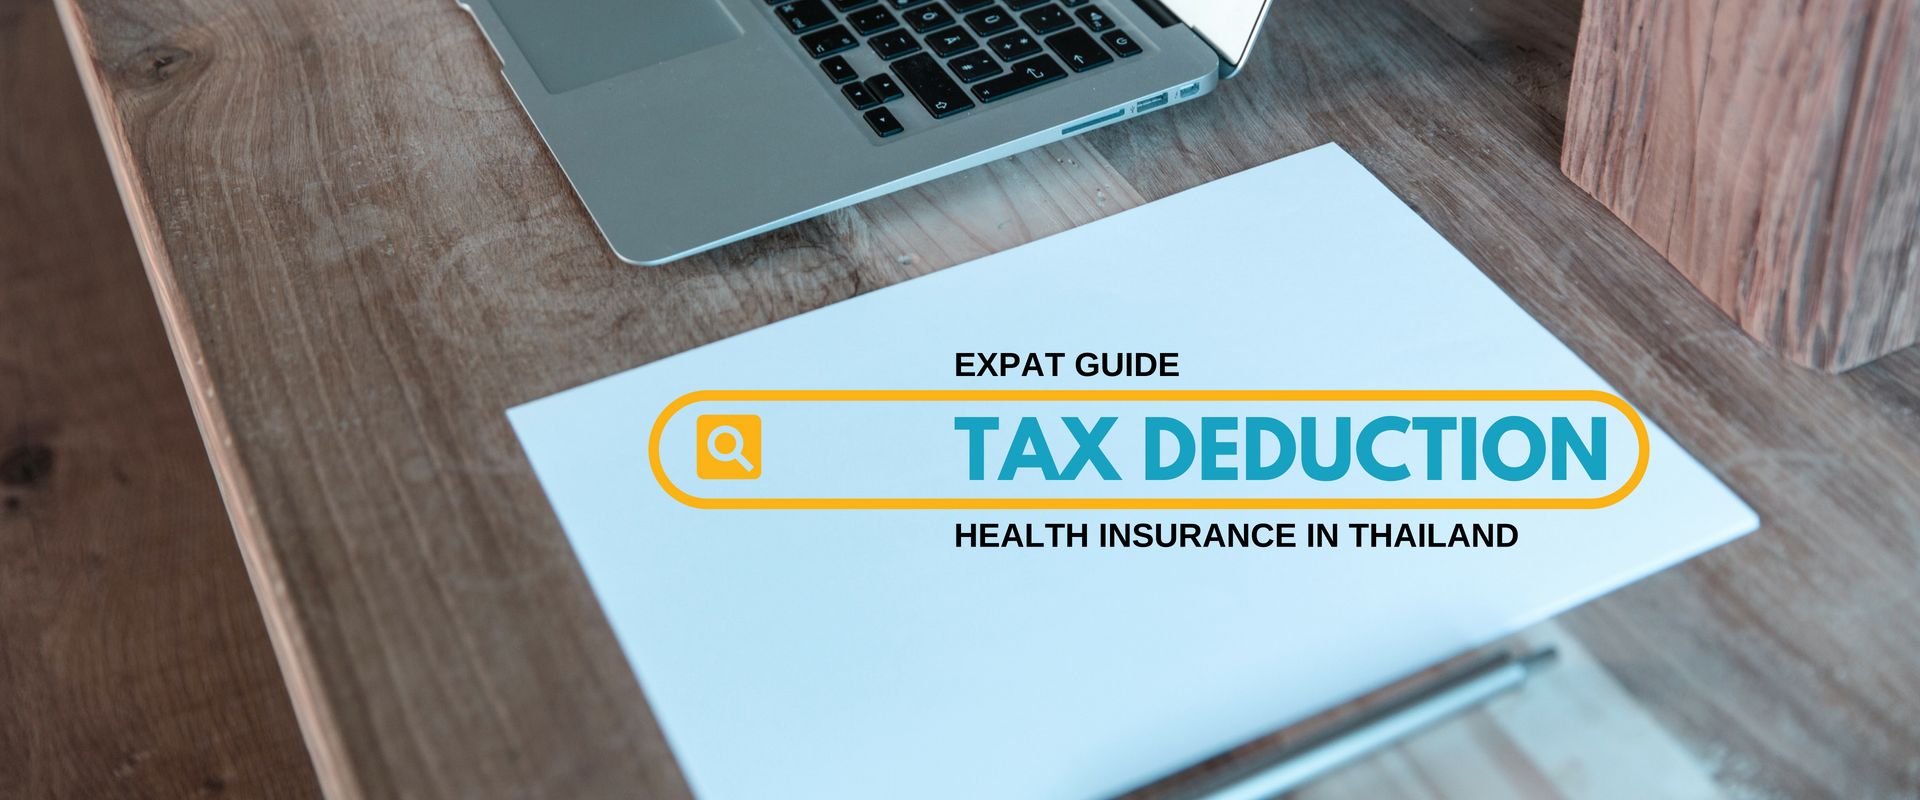 tax-deduction-thailand-2022-pay-less-with-health-insurance